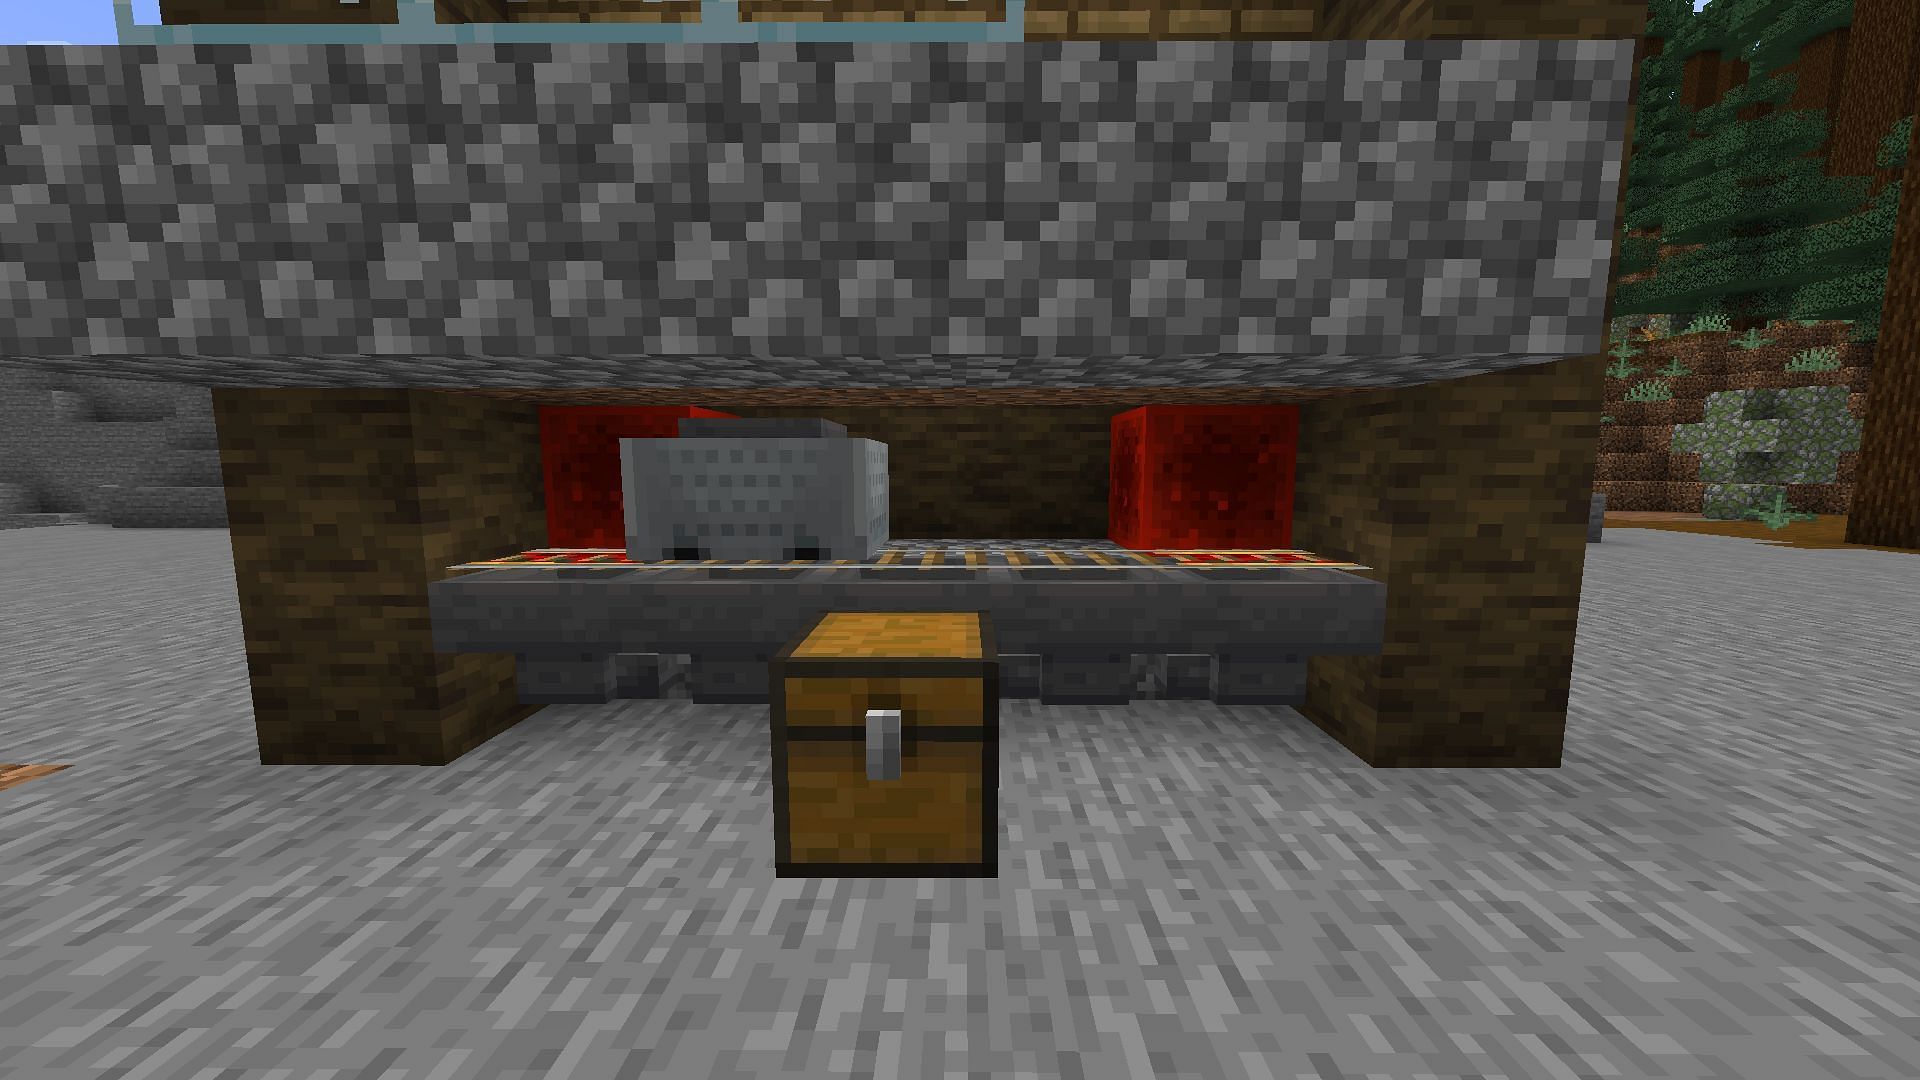 Collection area with hoppers, minecart on powered rails, and chest in Minecraft (Image via Mojang)